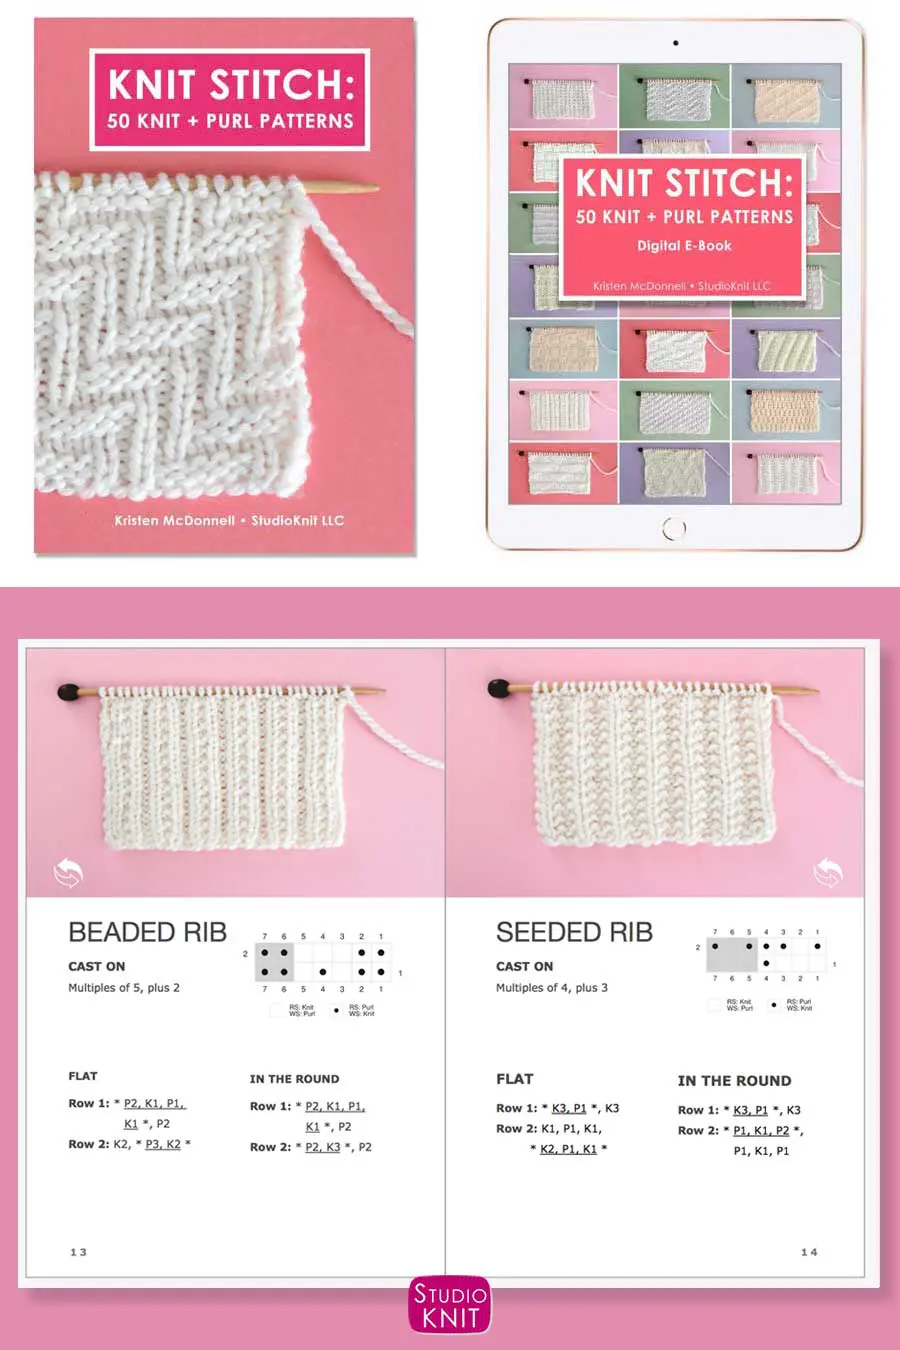 Knit Stitch Pattern Book with Beaded Rib and Seeded Rib Stitch Patterns